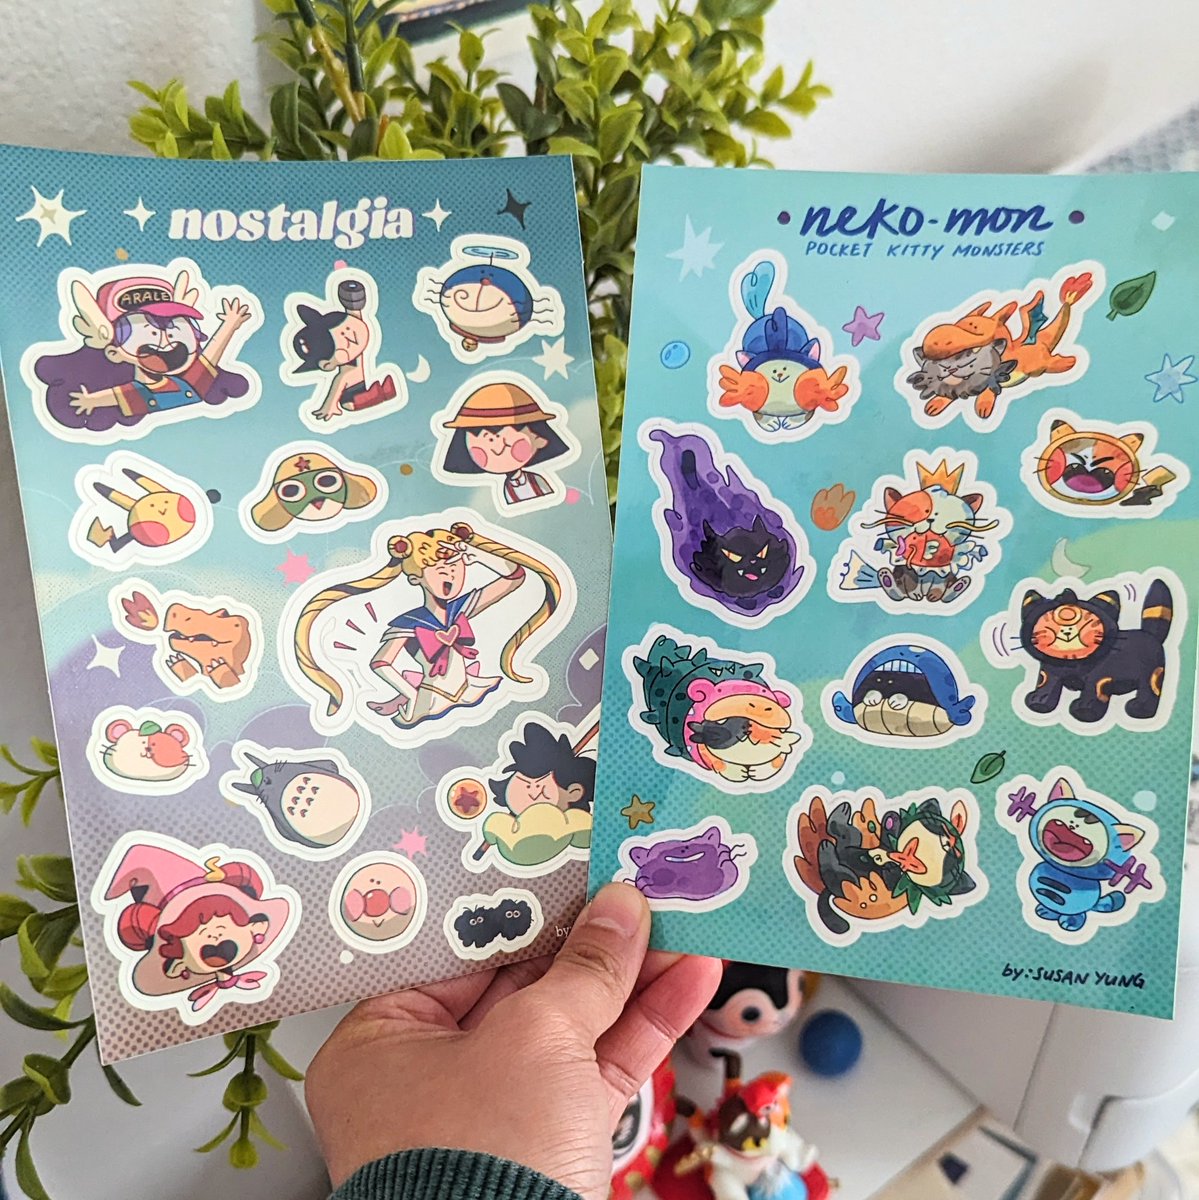 I was hoping to have these sticker sheets come in time for Sakura-con, but alas I got them a tad a little late! The nostalgia ones have a slight chromatic aberration to them, it might be hard to see in the picture XD